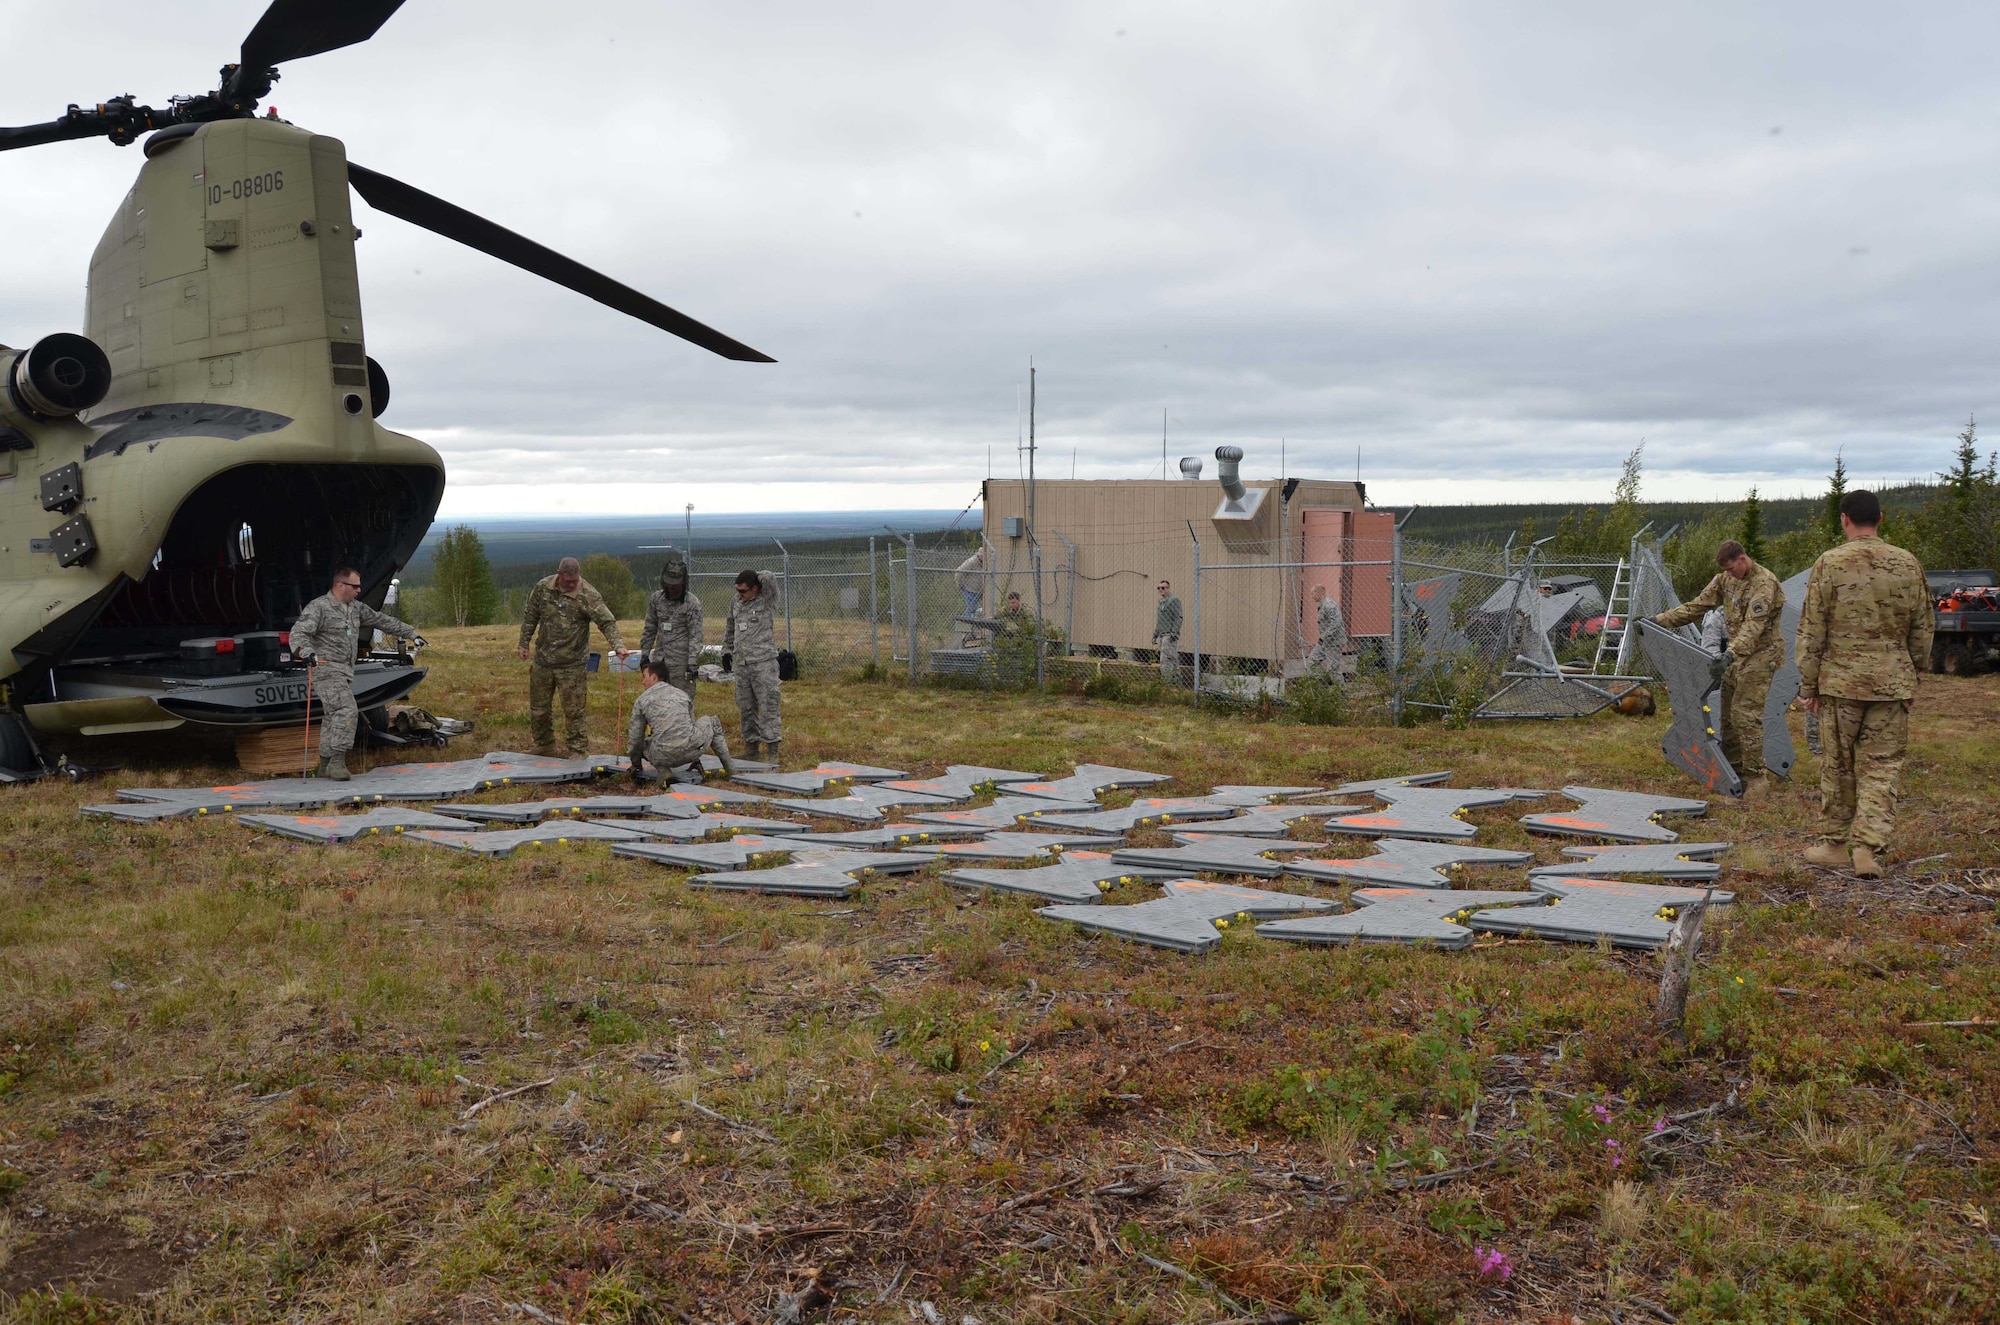 Airmen from the Air Force Technical Applications Center's Detachment 460 at Eielson AFB and Soldiers from B Company, 1-52 Aviation Brigade at Ft. Wainwright – both units near Fairbanks, Alaska – painstakingly lay several yards of modular interlocking surfacing July 17, 2015, to help shore up the ground as the crews transferred two radioisotope thermoelectric generators, or RTGs, via forklift to an awaiting CH-47 Chinook.  The RTGs, which contain nuclear material, were originally used as a power source, but were deemed excess when a hybrid power source was developed to operate AFTAC's seismic array. (U.S. Air Force photo by Susan A. Romano)